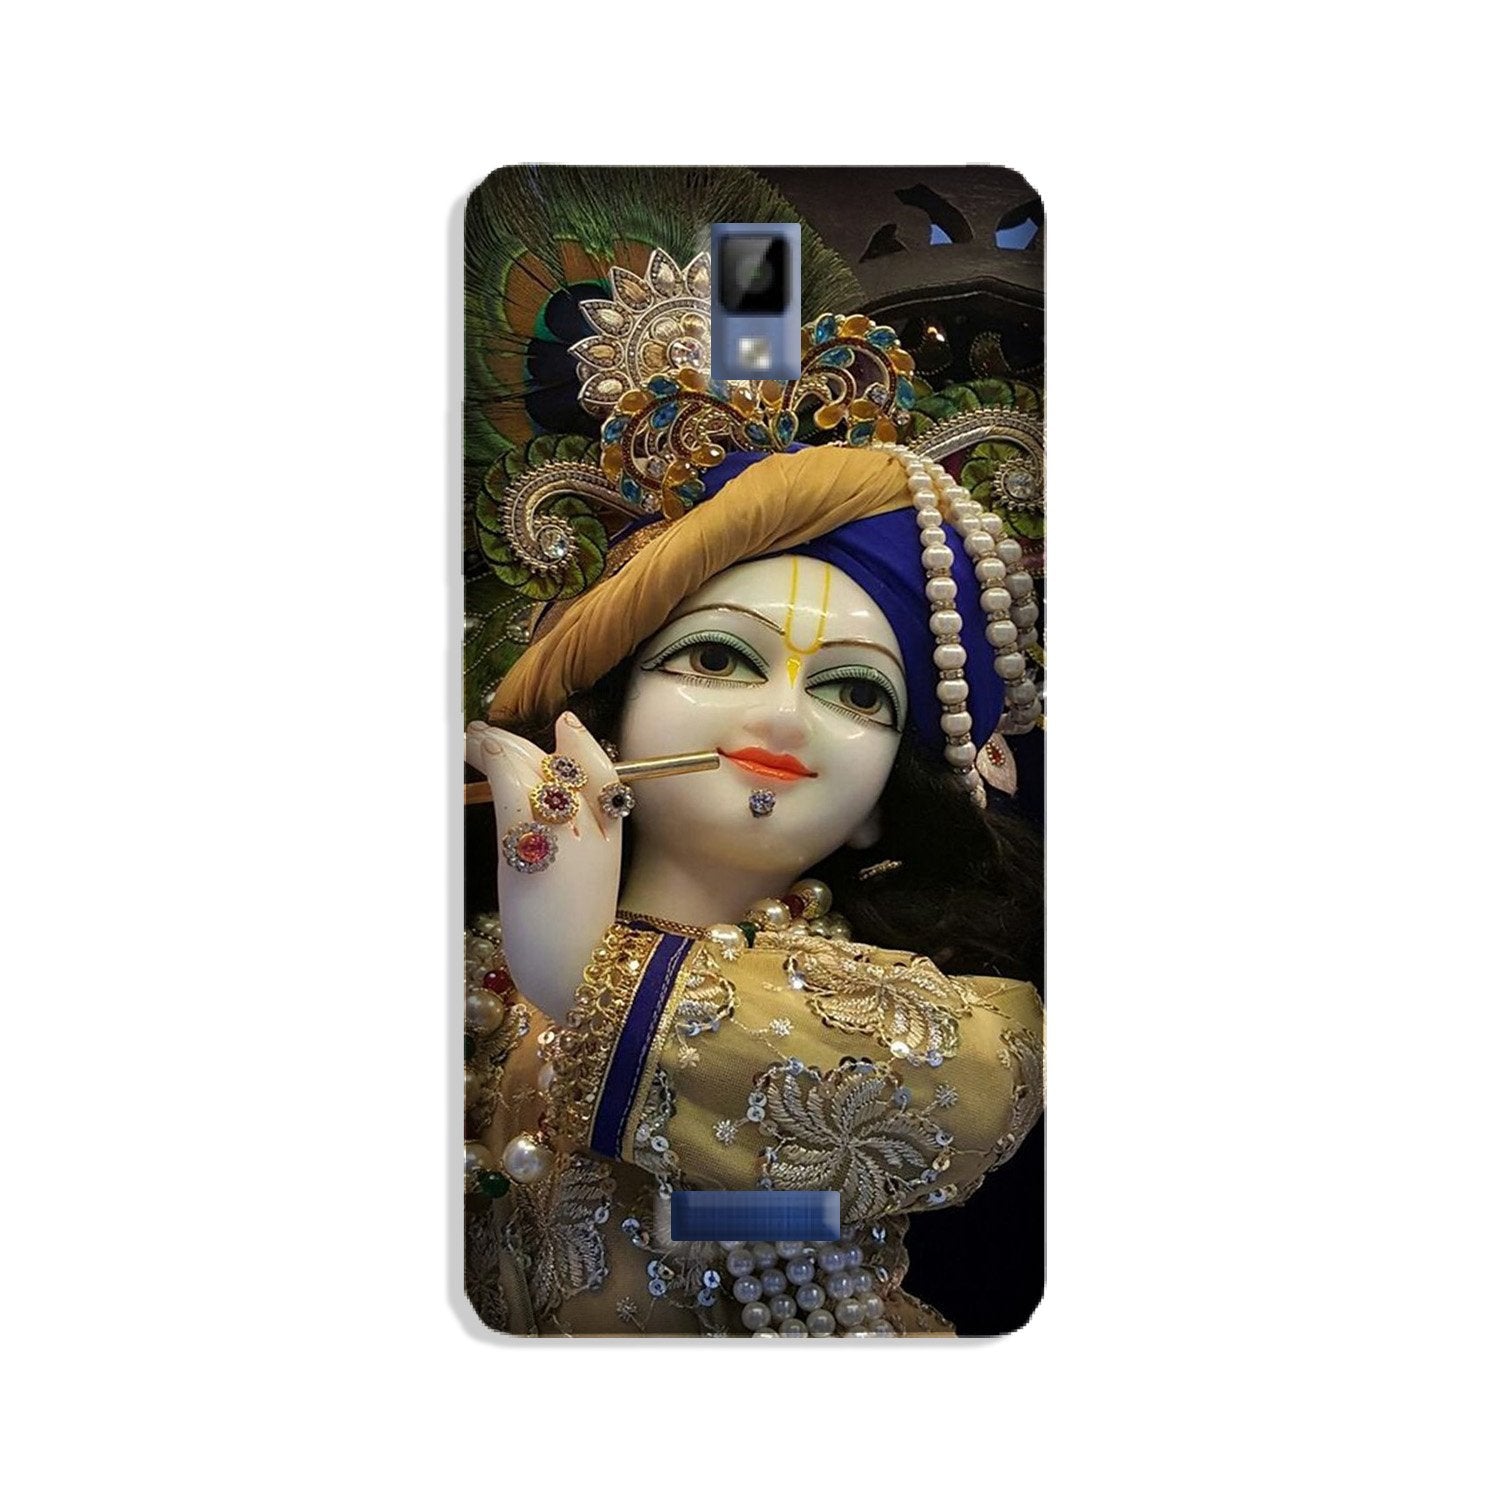 Lord Krishna3 Case for Gionee P7